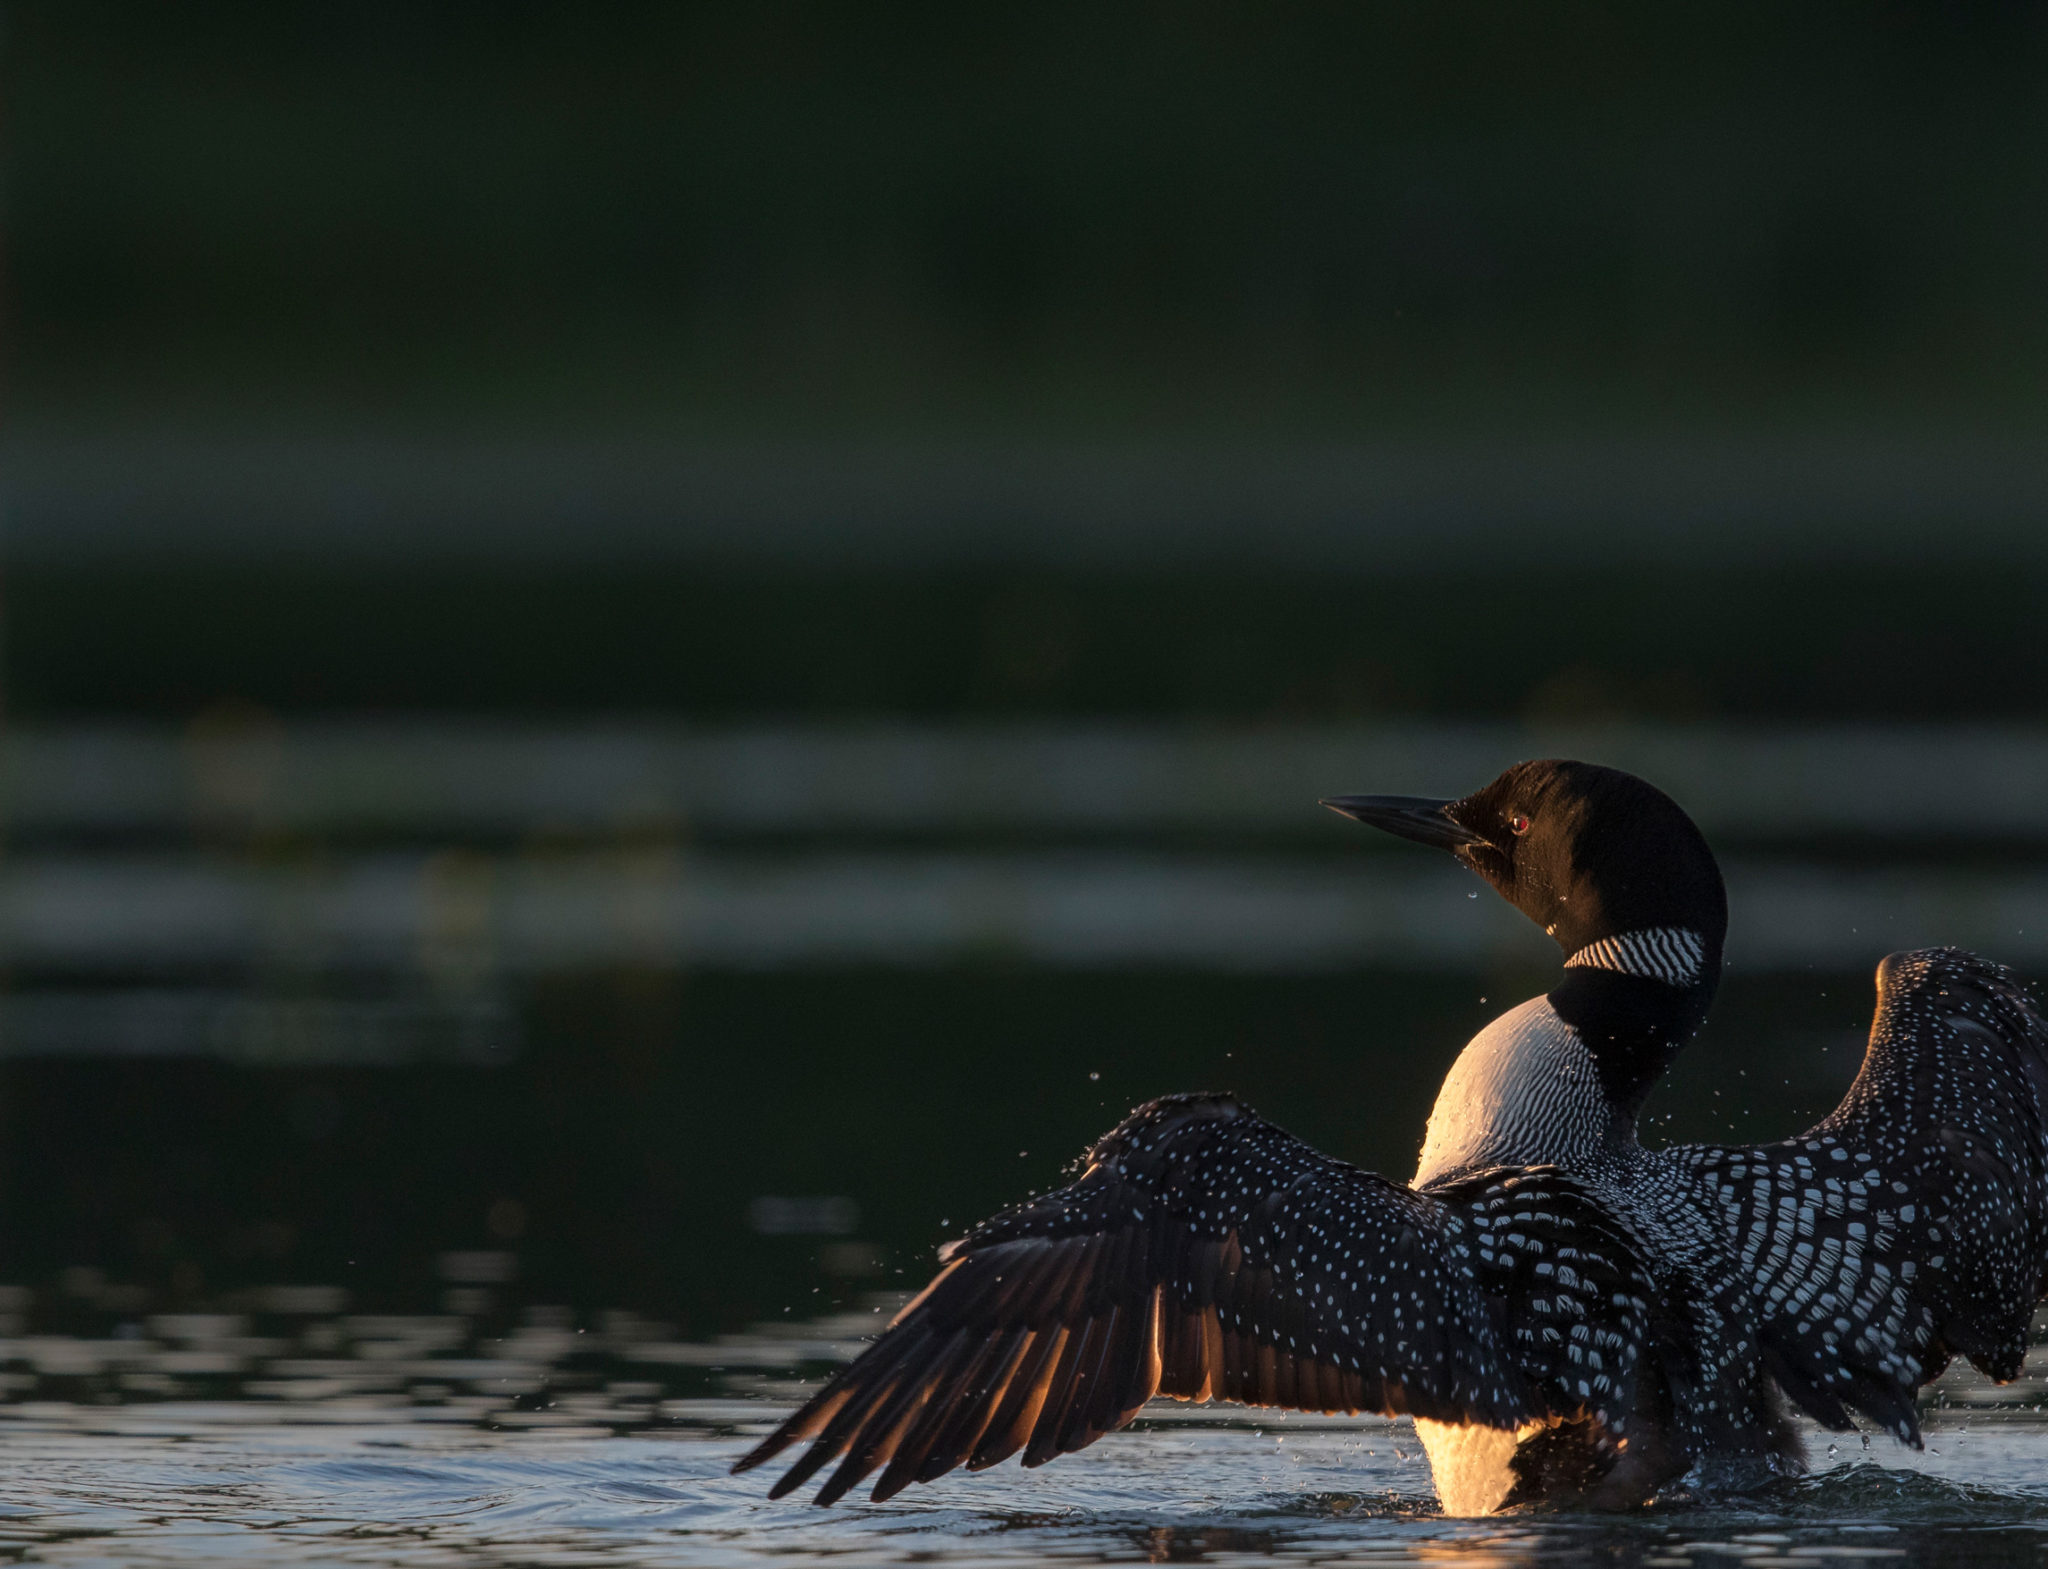 loon on water